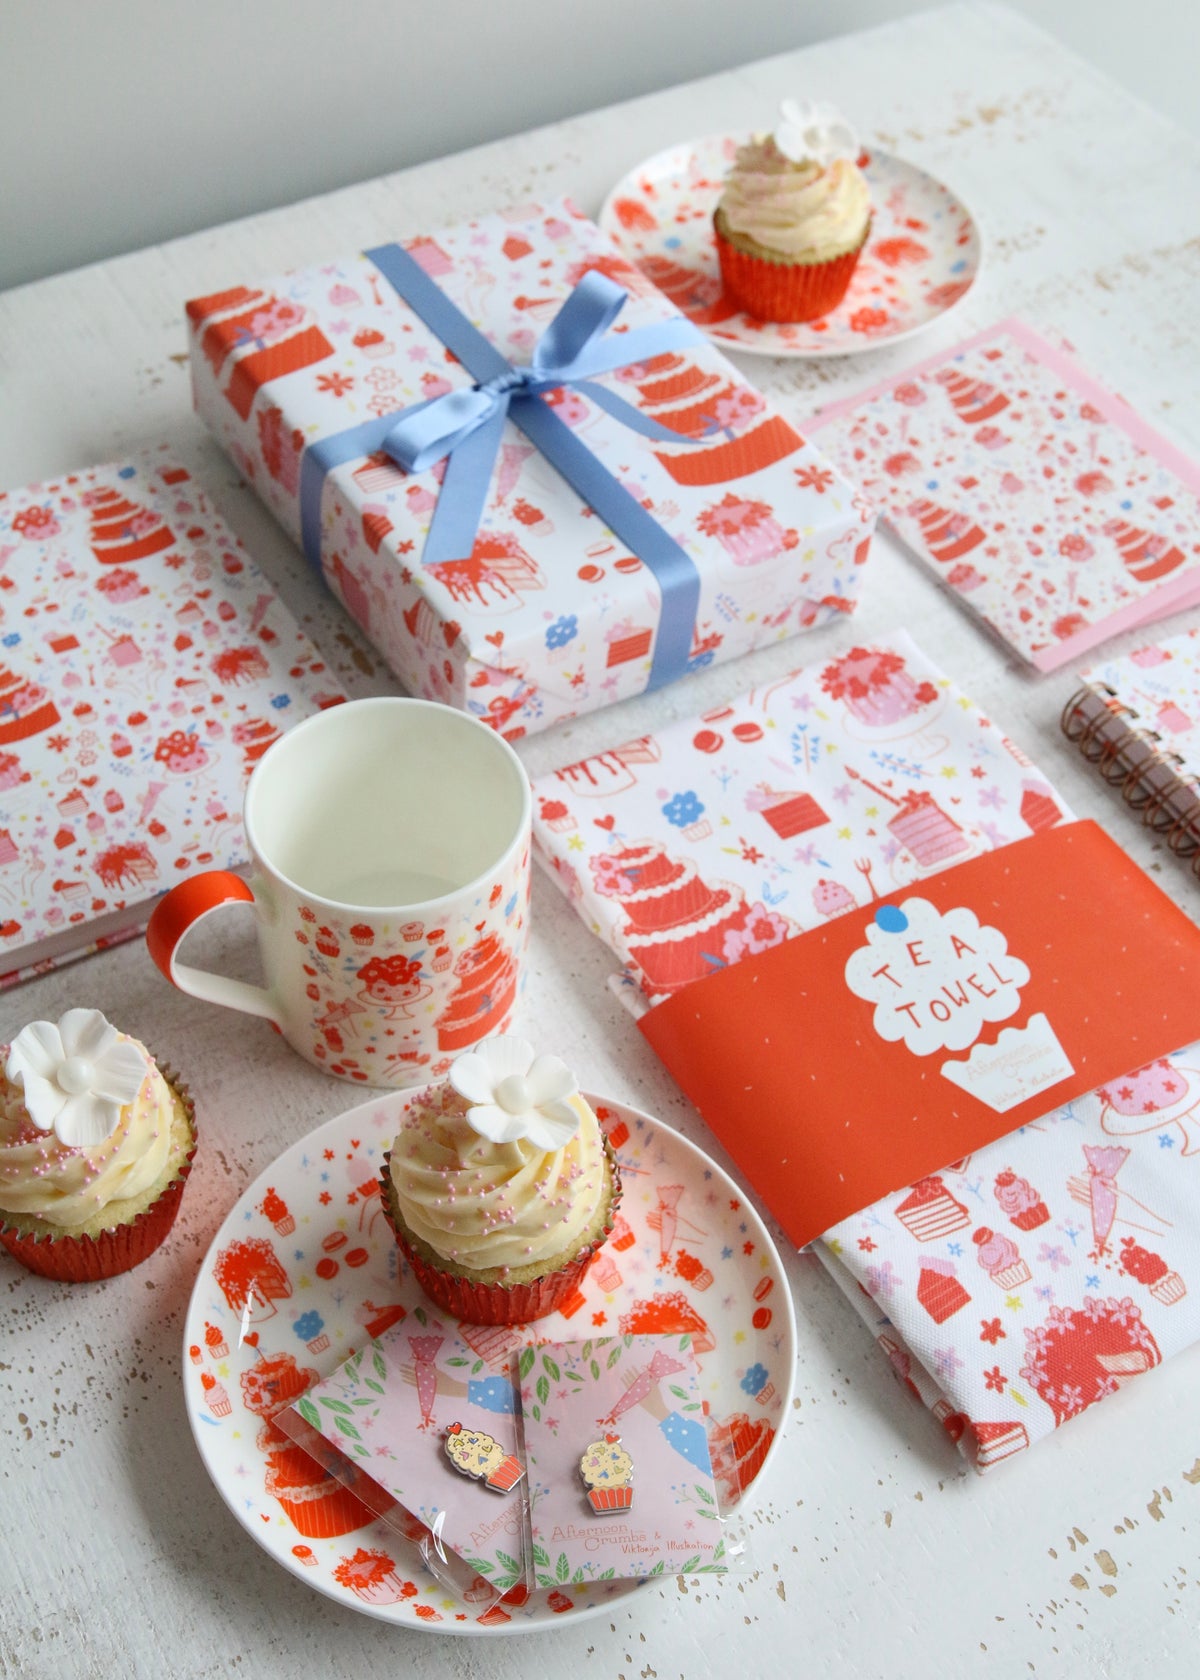 'Spreading Sweetness' Cake & Cupcake Gift Collection